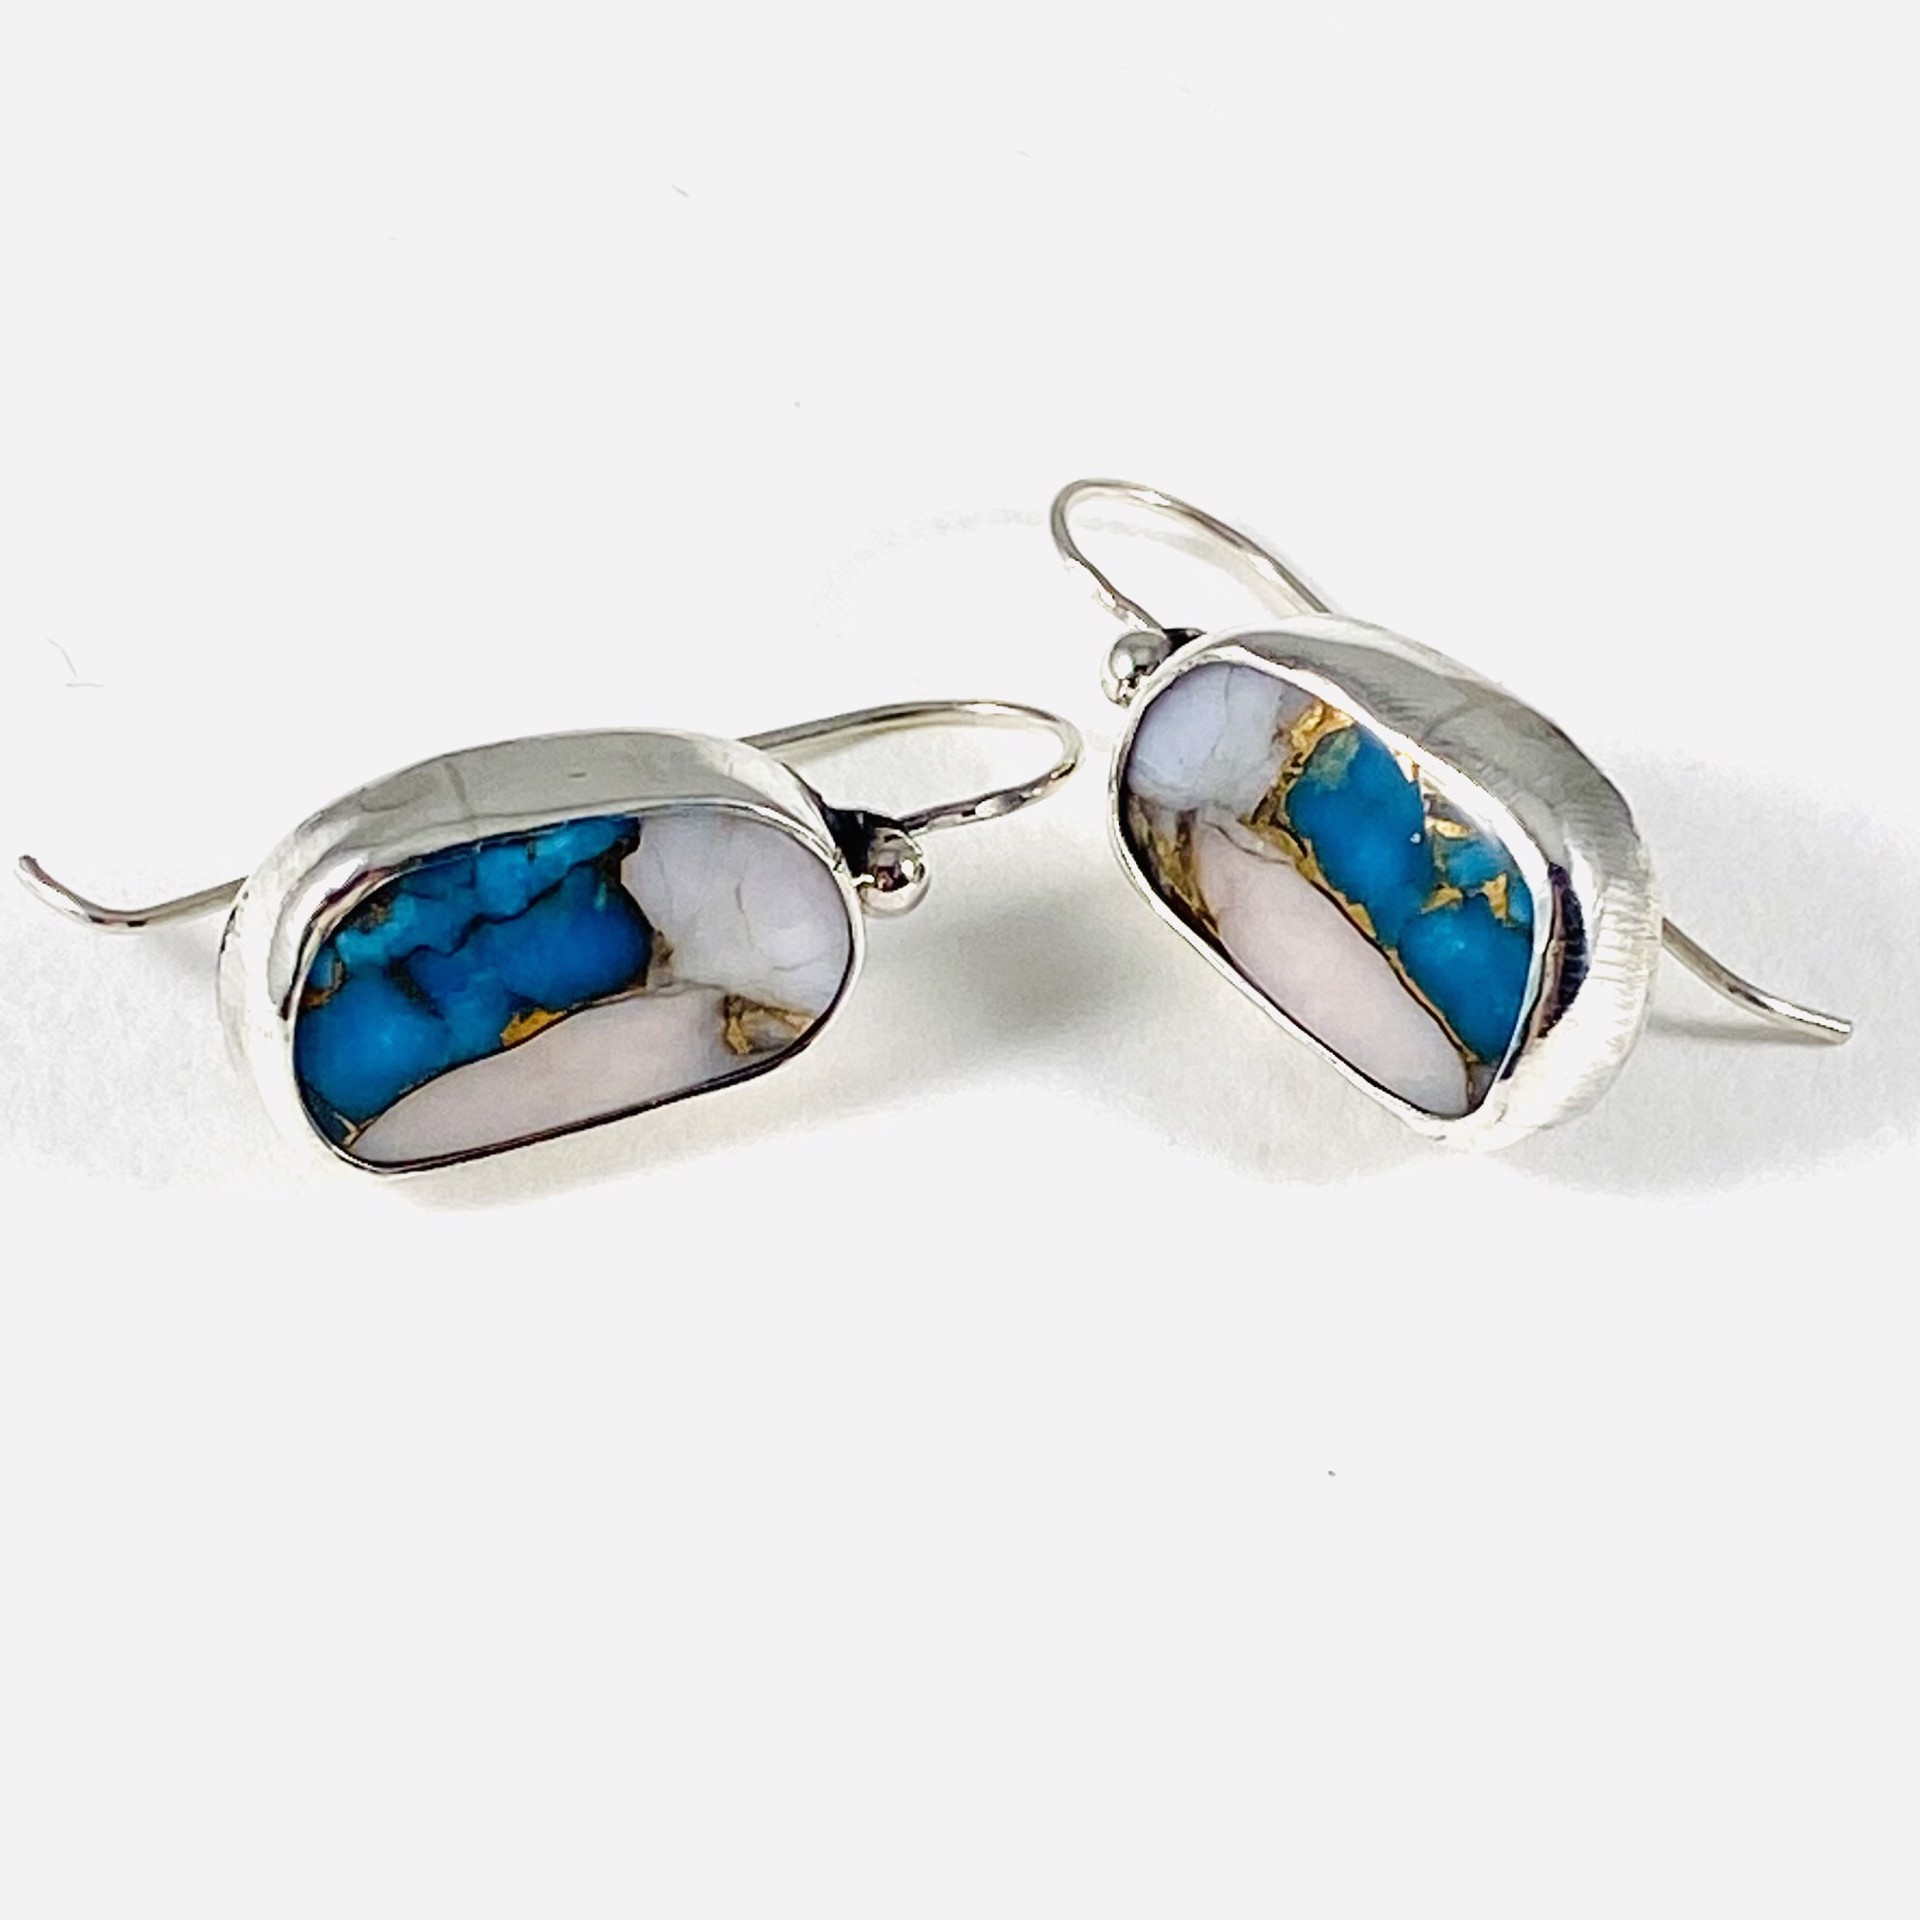 AB21-62 Kingman Turquoise Peruvian Opal Bronze Composite Earrings by Anne Bivens